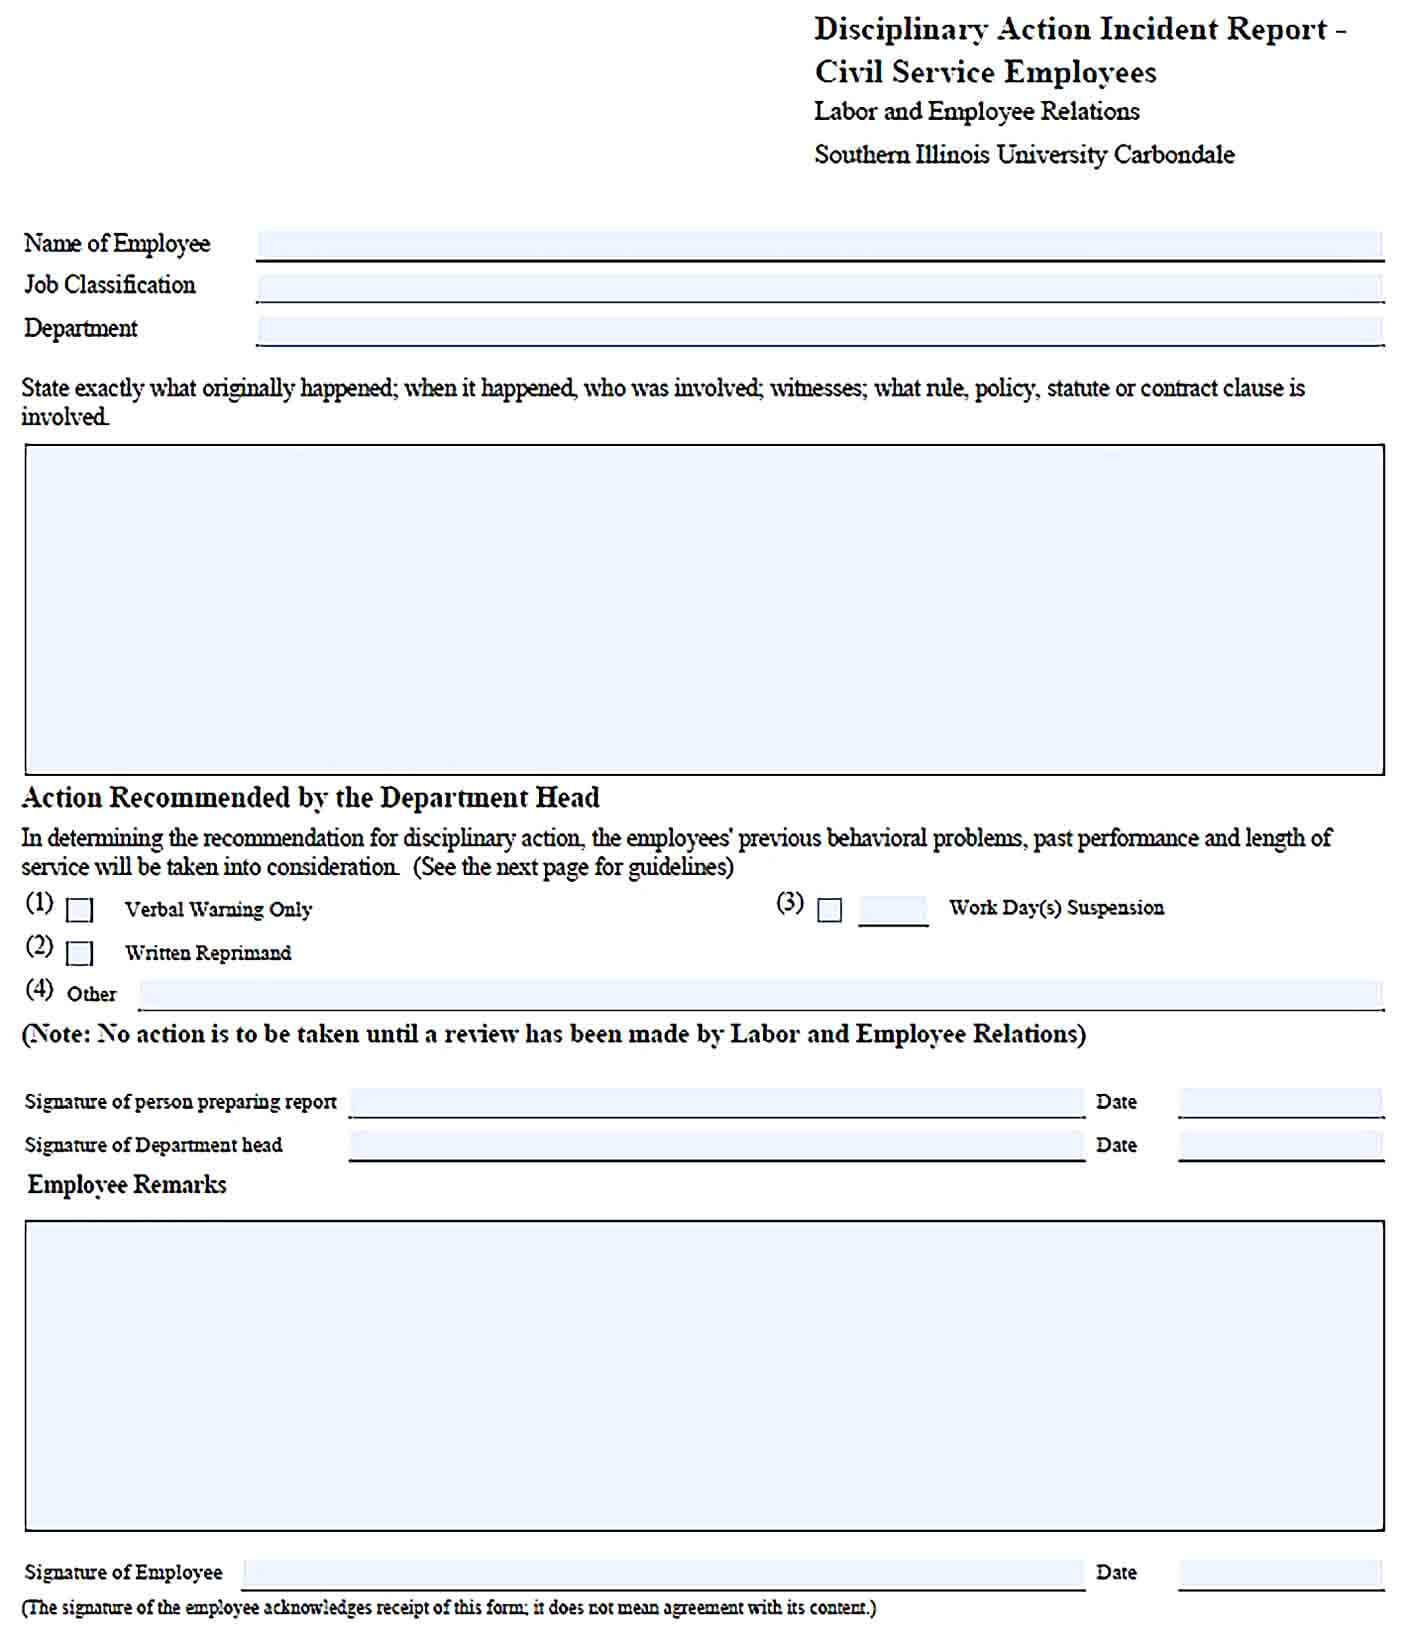 Sample Disciplinary Action Incident Report Template